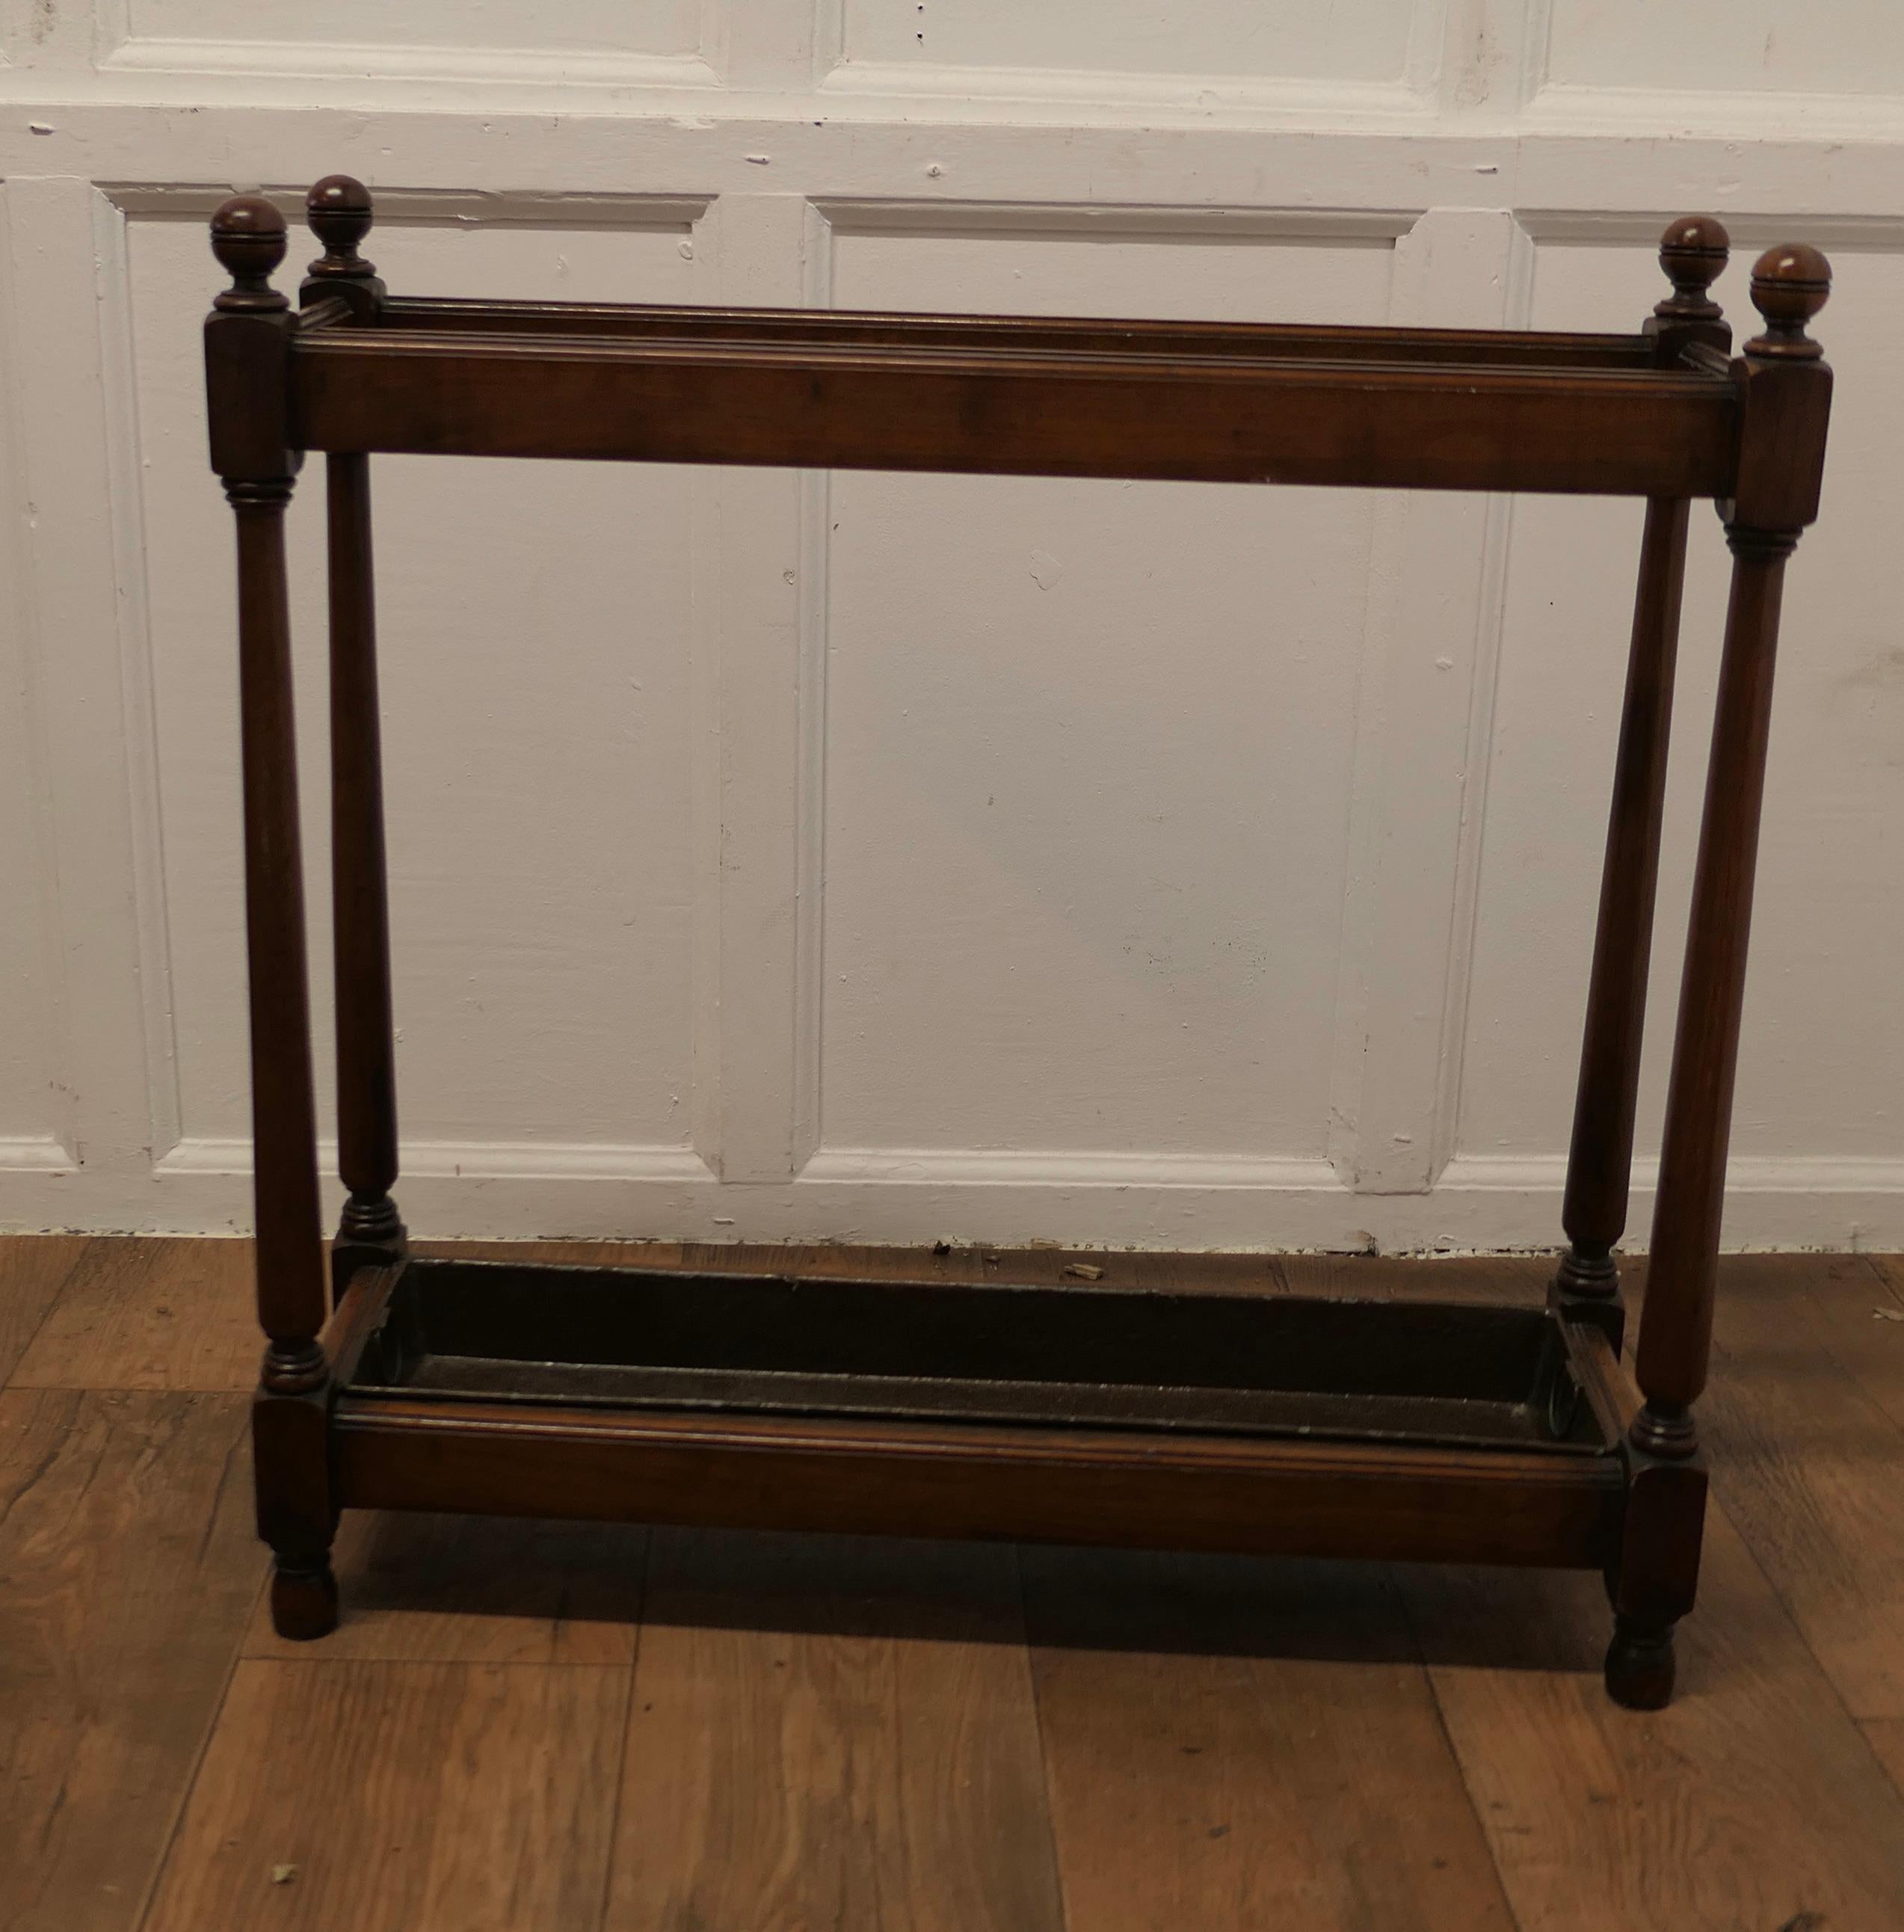 A Long Walnut Stick Stand or Umbrella Stand

This is a good Umbrella stand, it is made in walnut with turned spindles and a long metal drip tray 
The top is  divided into 12 sections and it will hold a lot of Walking Sticks,Umbrellas, Tennis Rackets